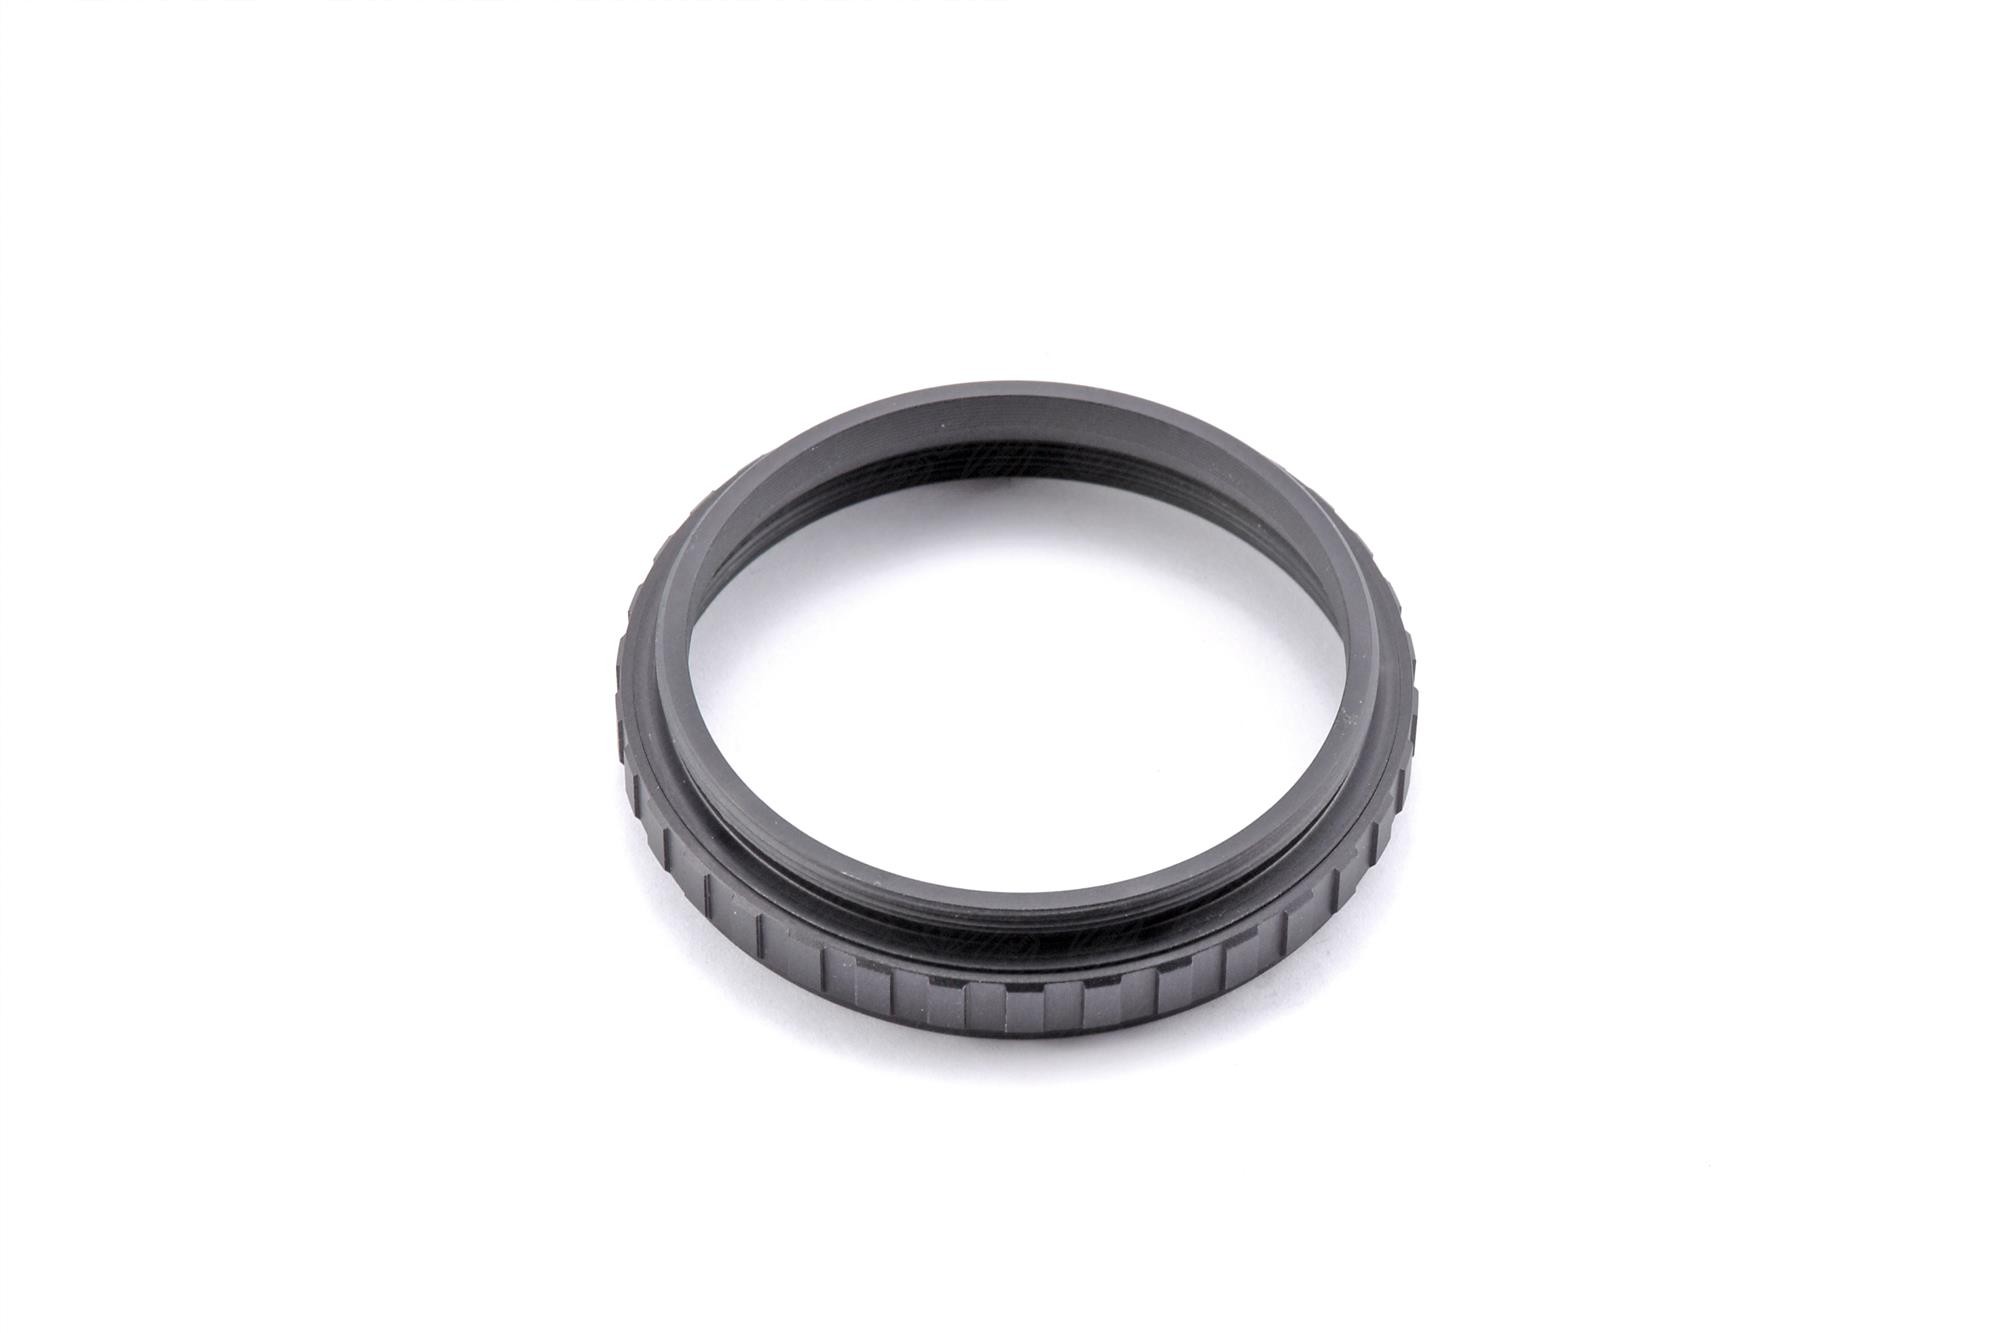 Baader M68 Extension tube 10mm